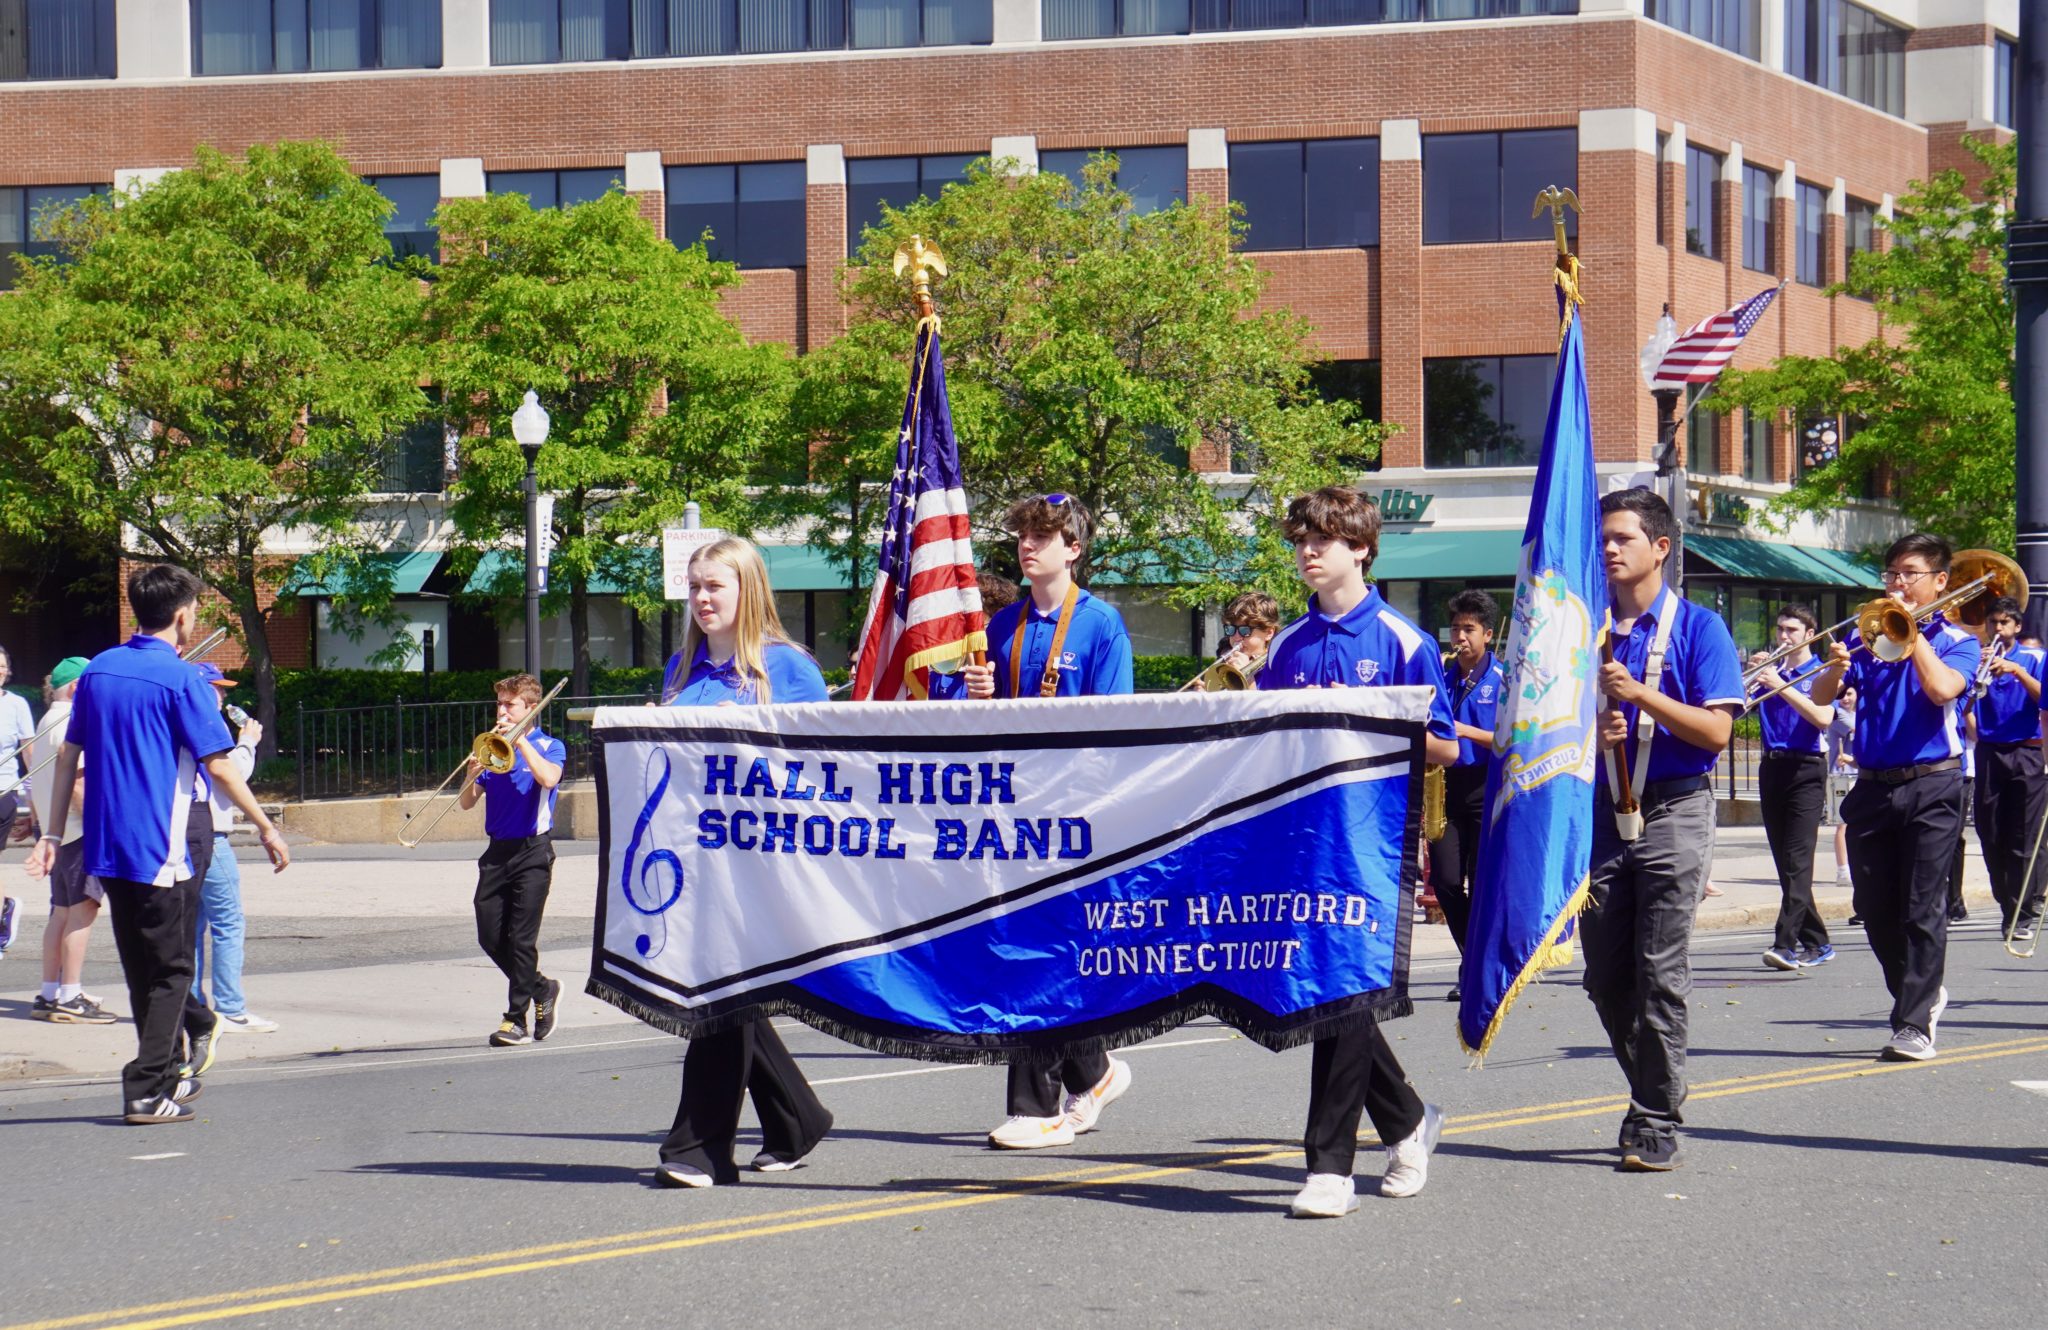 Scenes from the 2023 West Hartford Memorial Day Parade WeHa West